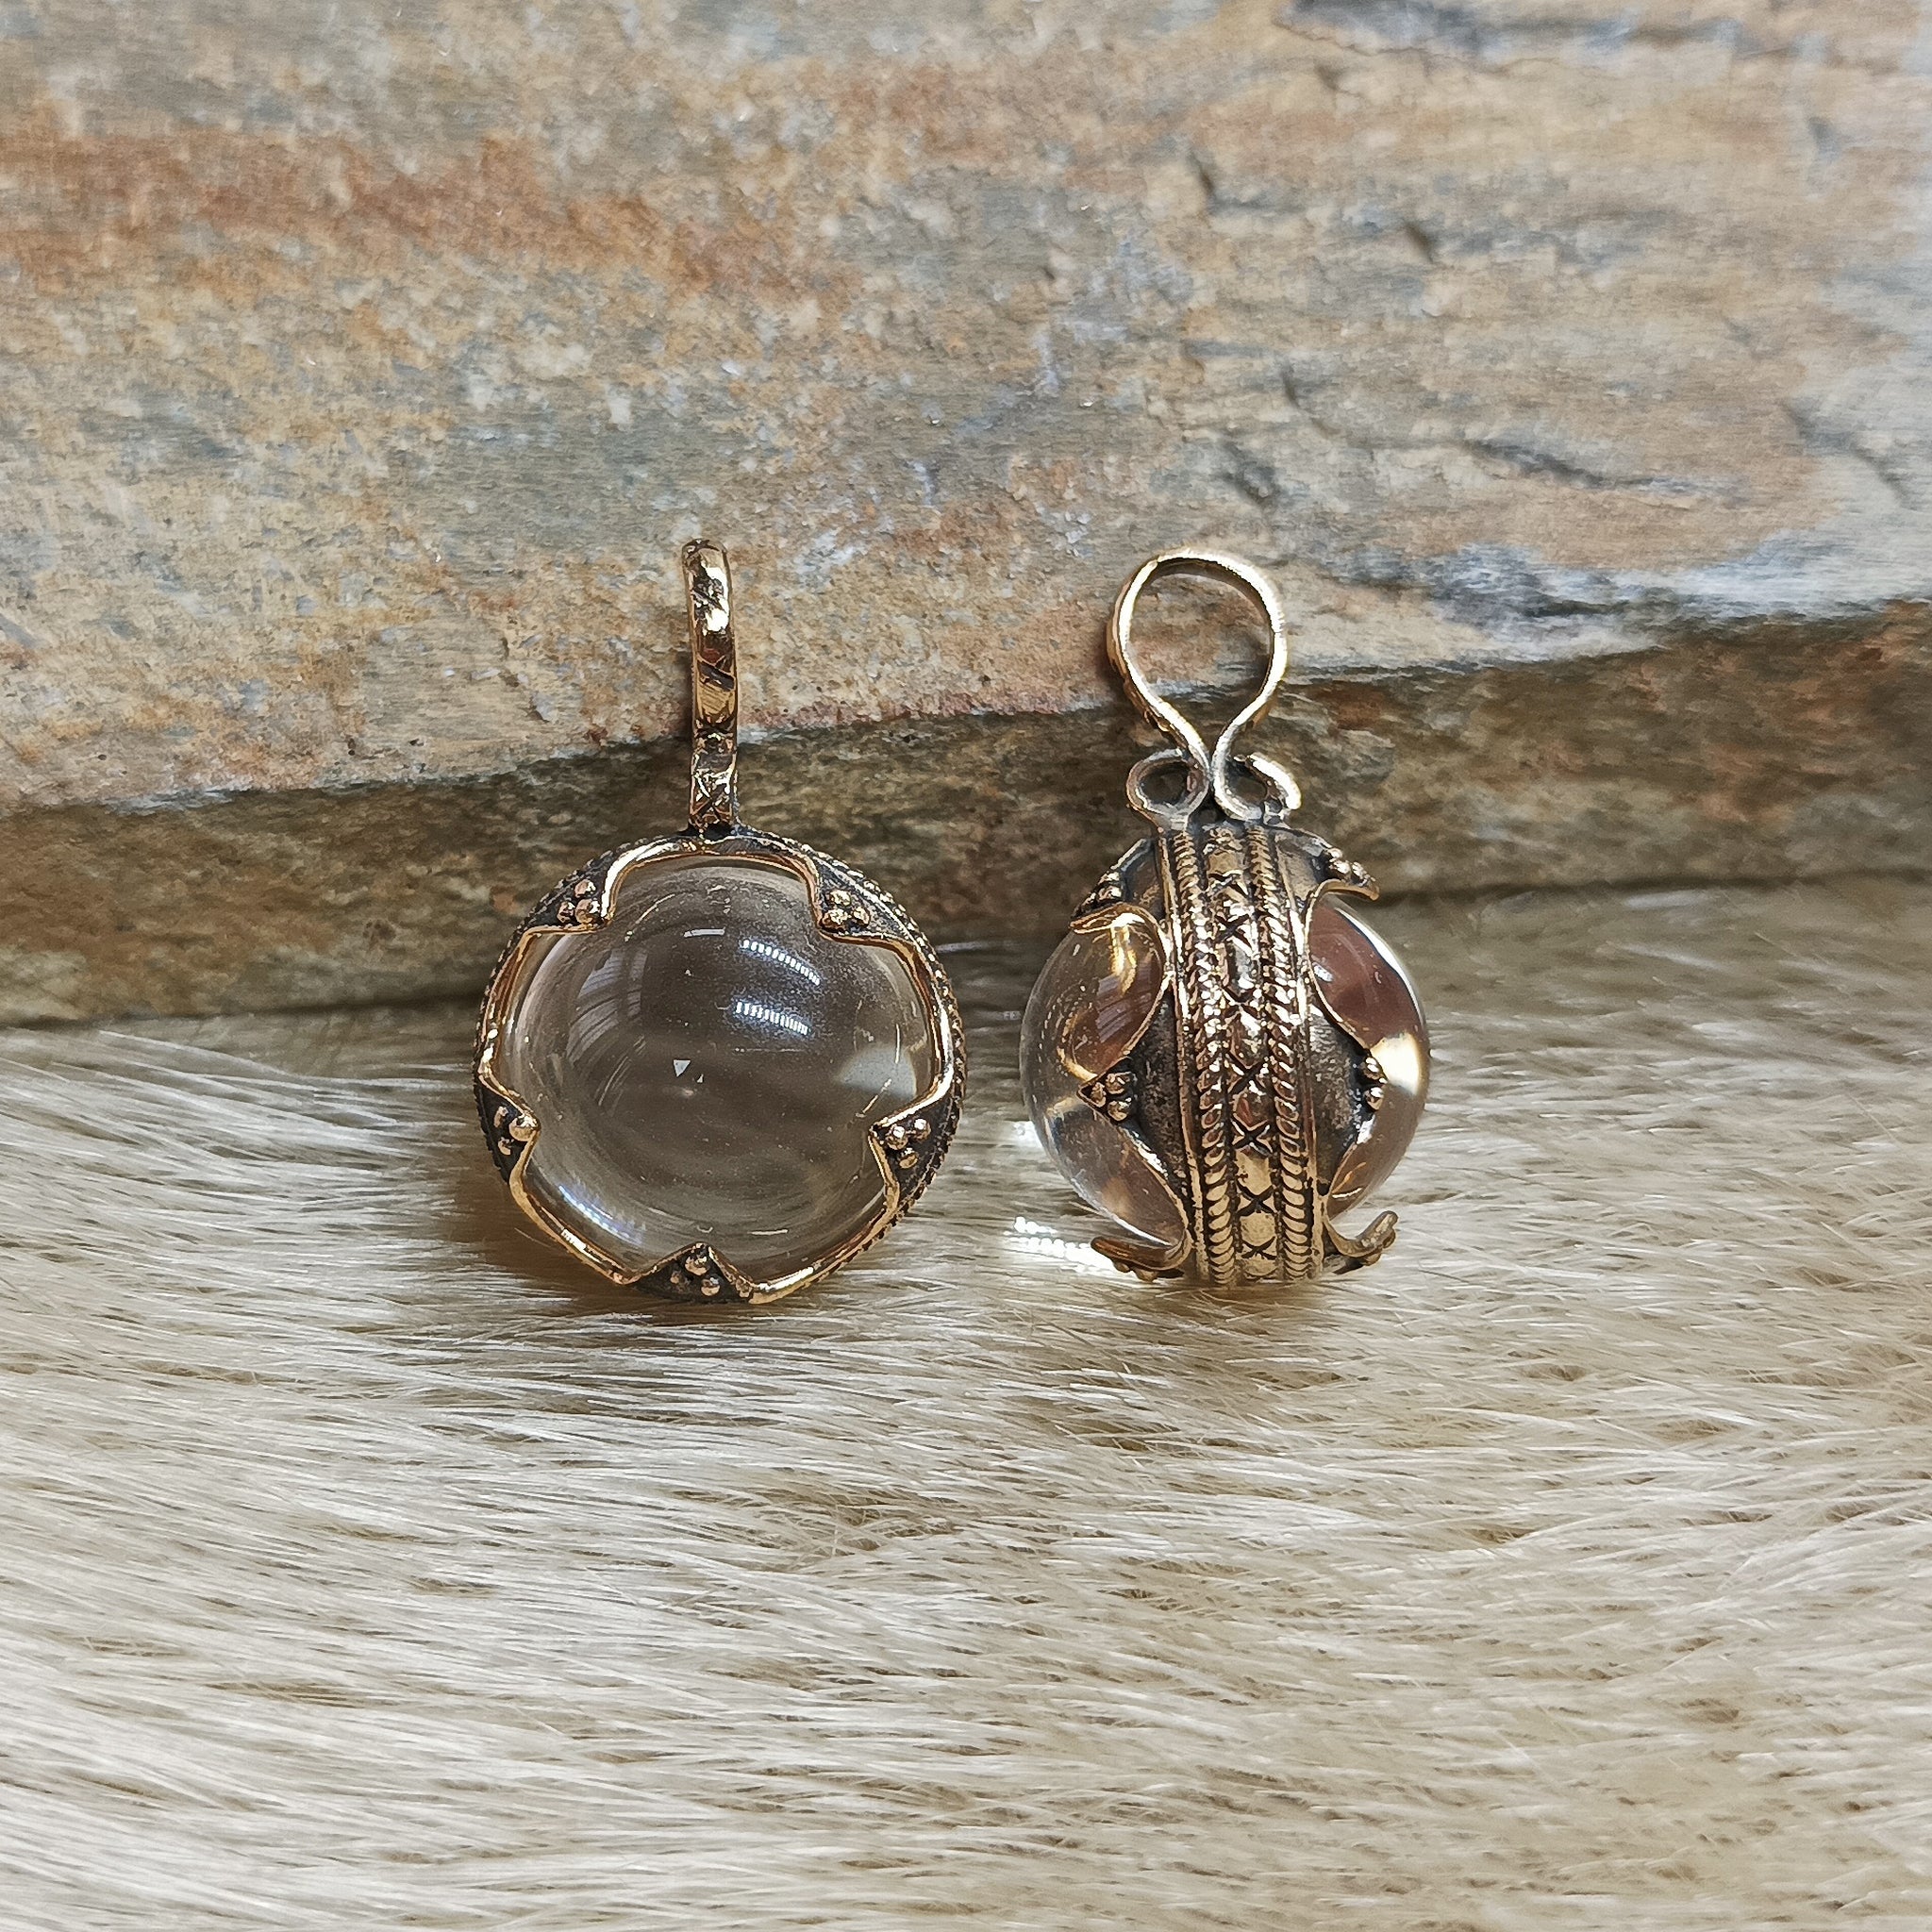 Small Bronze Gotland Crystal Ball Pendants - Front & Side View